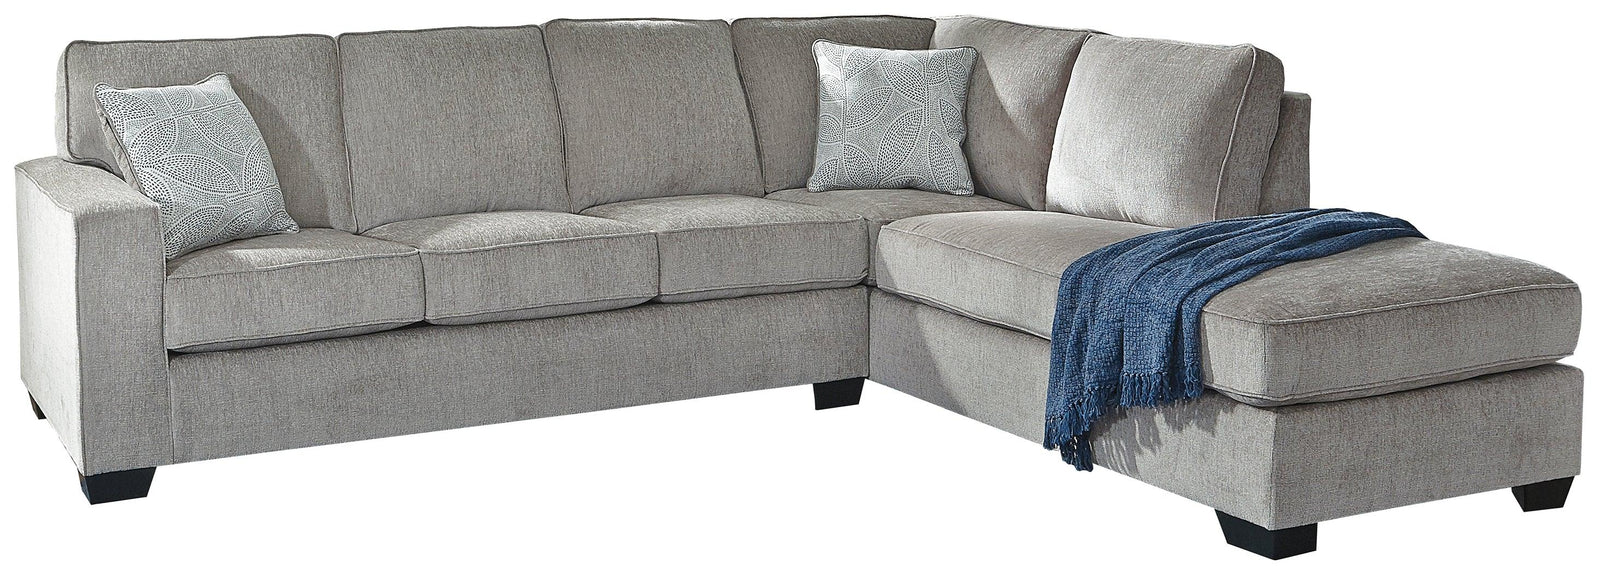 Altari Alloy Chenille 2-Piece Sleeper Sectional With Chaise 87214S3 - Ella Furniture